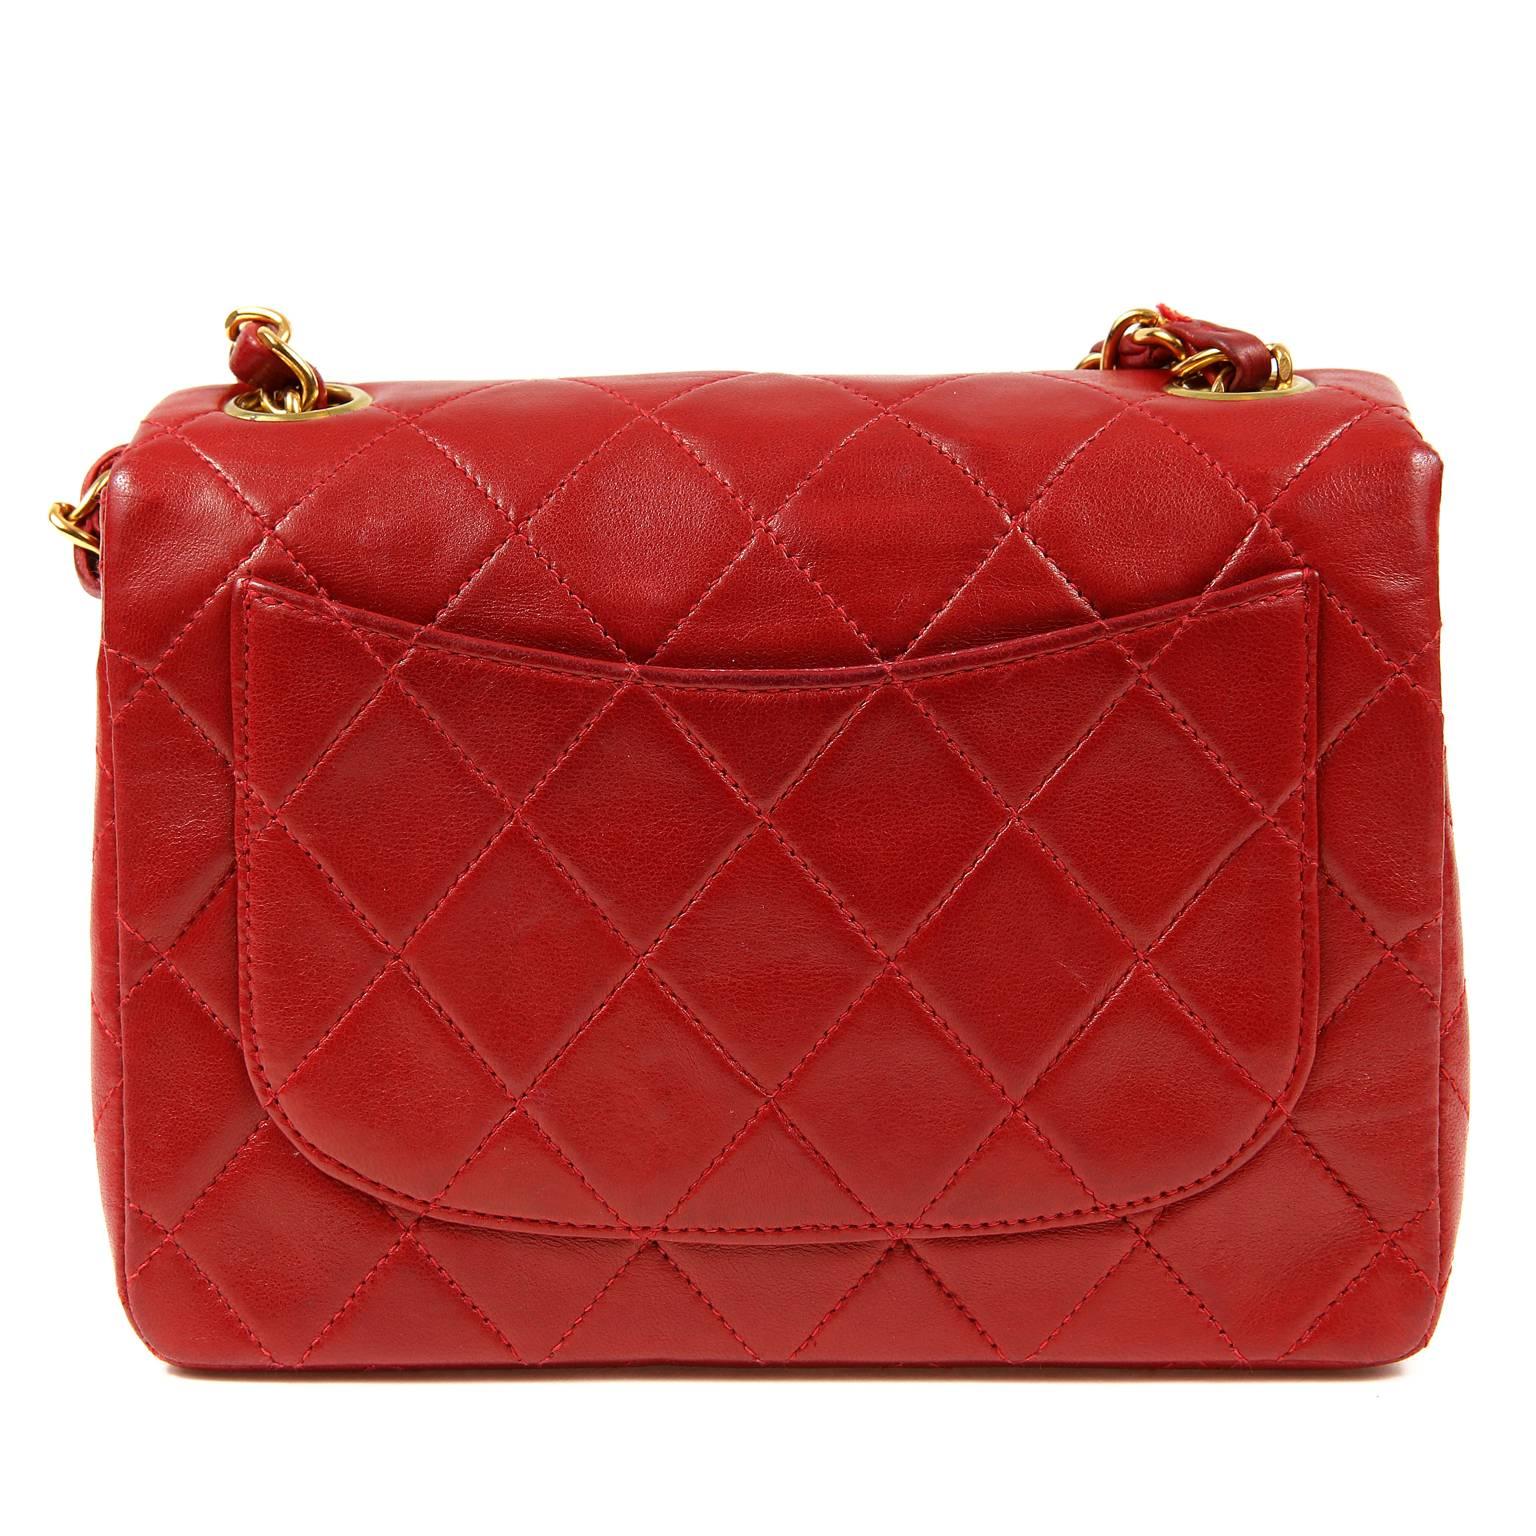 Chanel Red Lambskin Mini Classic is in excellent condition.   Stunning in vibrant red with gold hardware and wearable year-round.    

Lipstick Red lambskin is quilted in signature Chanel diamond pattern.  Gold interlocking Cc twist lock secures the